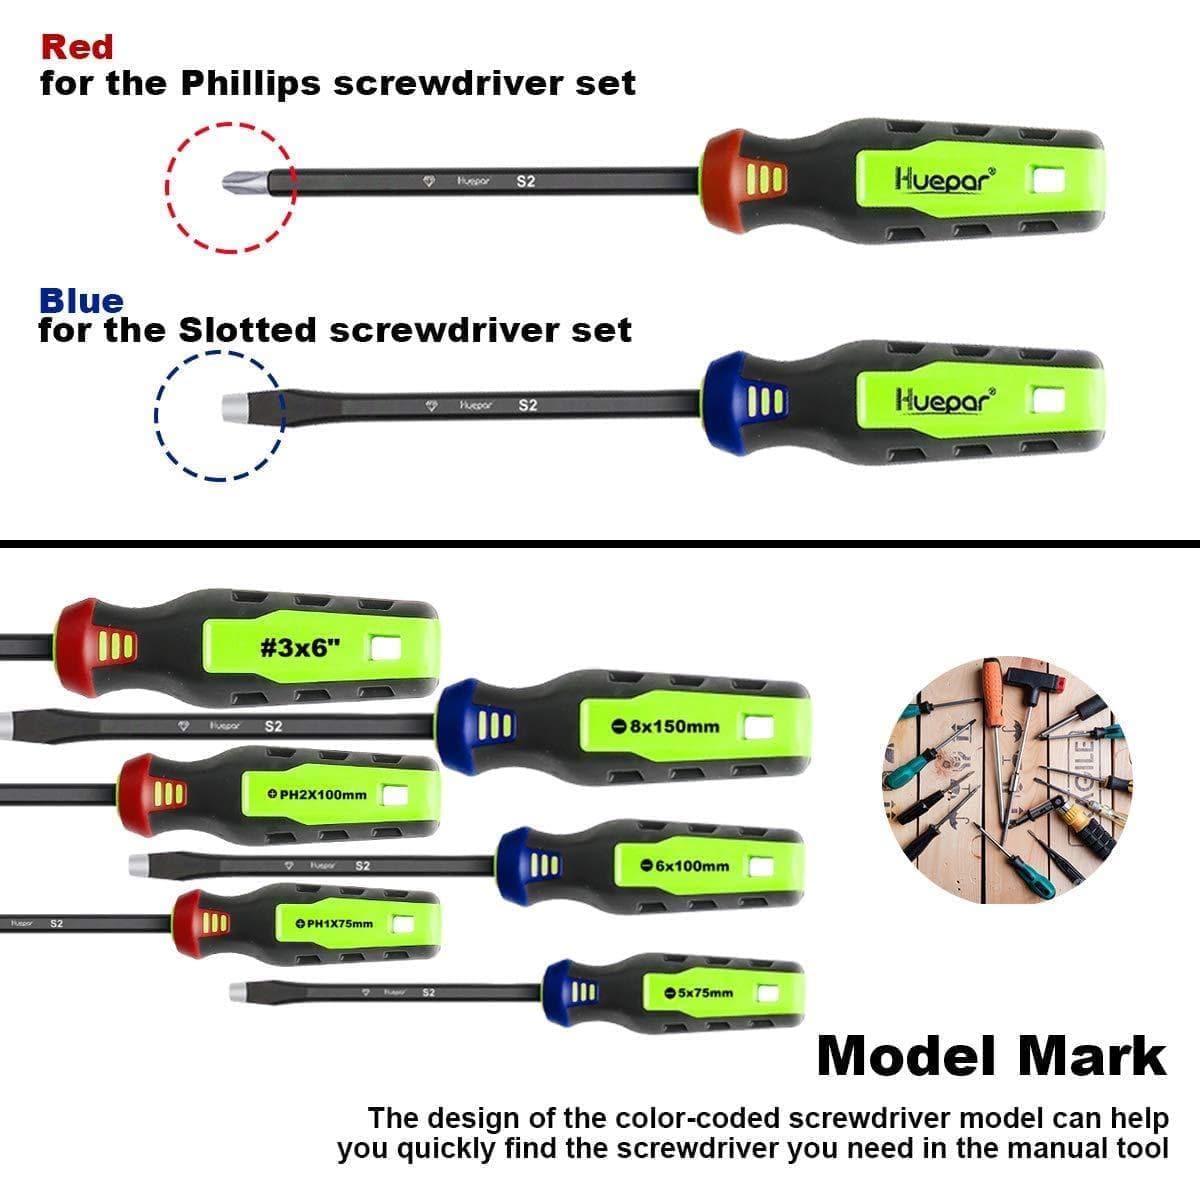 Huepar Magnetic Screwdriver Set with 3 Slotted and 3 Phillips Heads, Diamond Tip, Rust Resistant Shaft, Professional 6PCS Kit, Advanced Technology, Best Laser Level, Free Shipping8